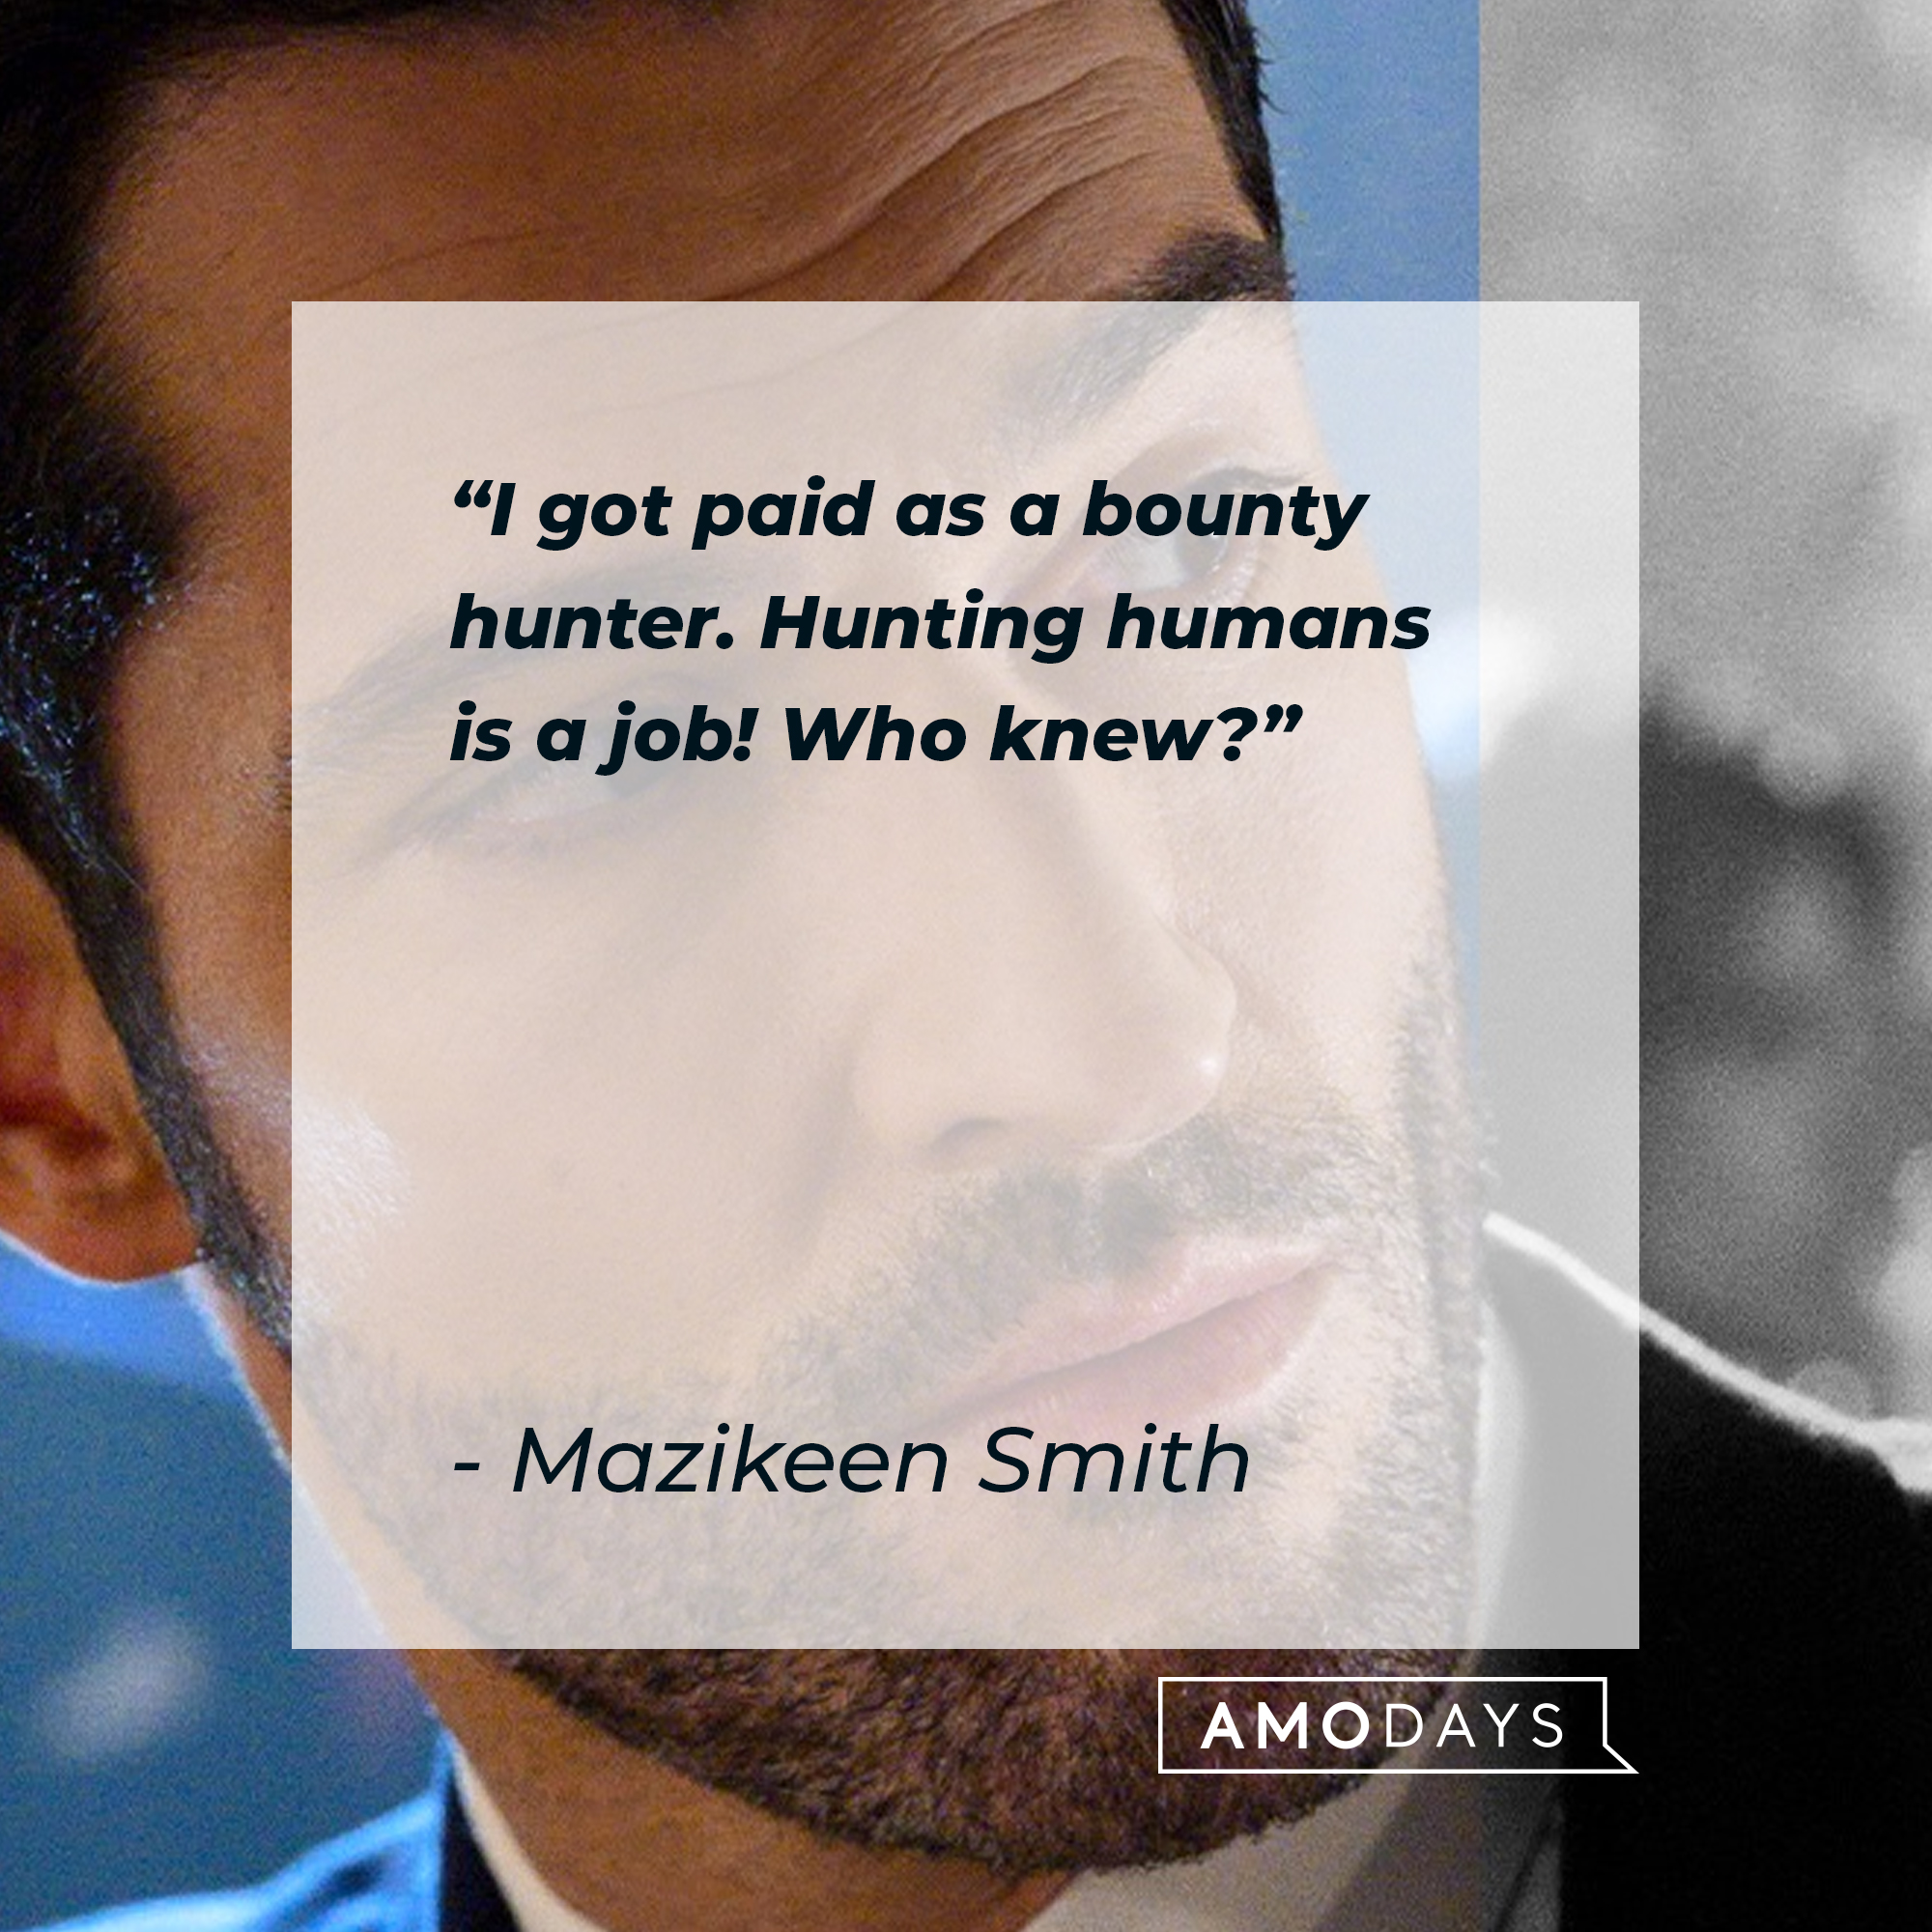 Mazikeen Smith’s quote: "I got paid as a bounty hunter. Hunting humans is a job! Who knew?" | Source: Facebook.com/LuciferNetflix